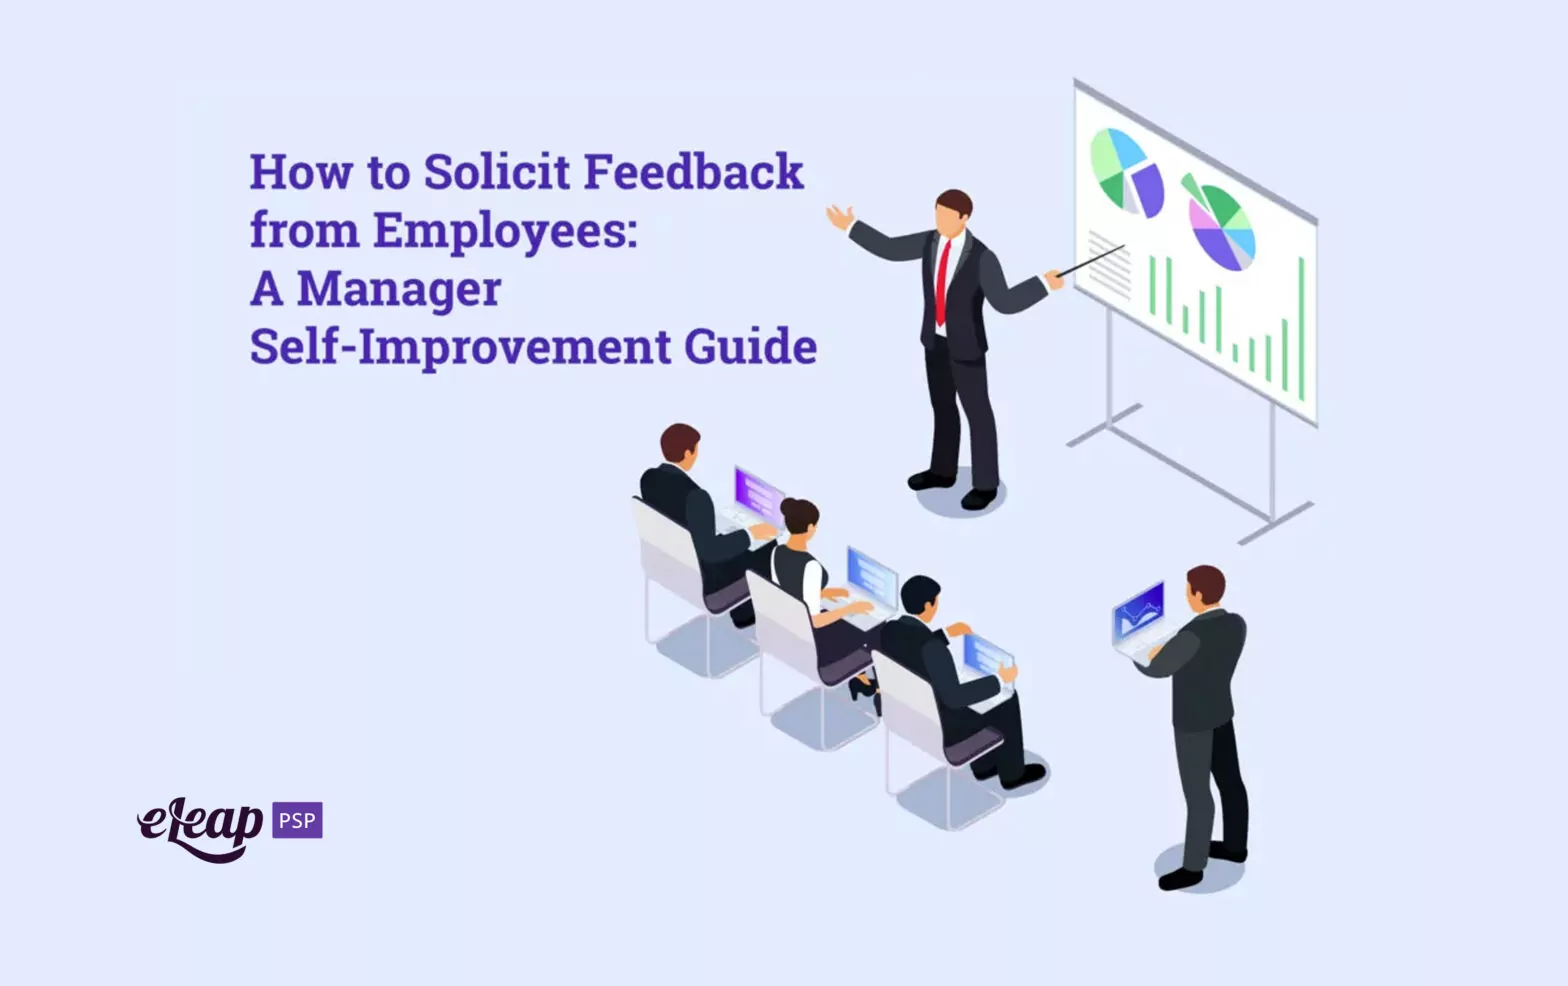 How to Solicit Feedback from Employees: A Manager Self-Improvement Guide